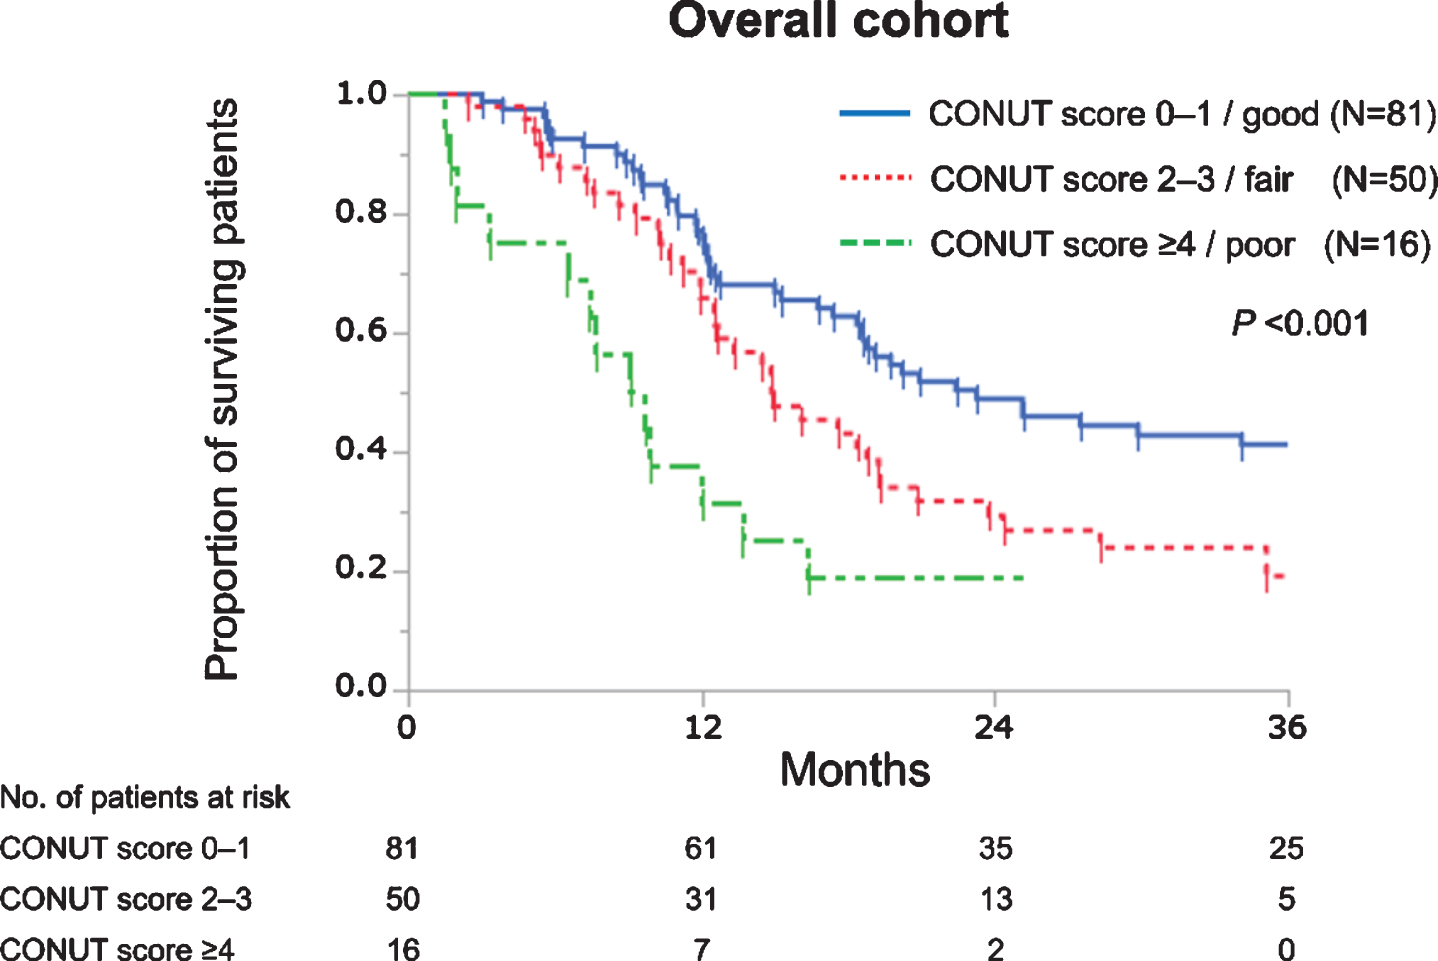 Kaplan–Meier curves estimate overall survival of 147 patients with advanced urothelial carcinoma treated with first-line platinum-based chemotherapy according to the controlling nutritional status (CONUT) score.